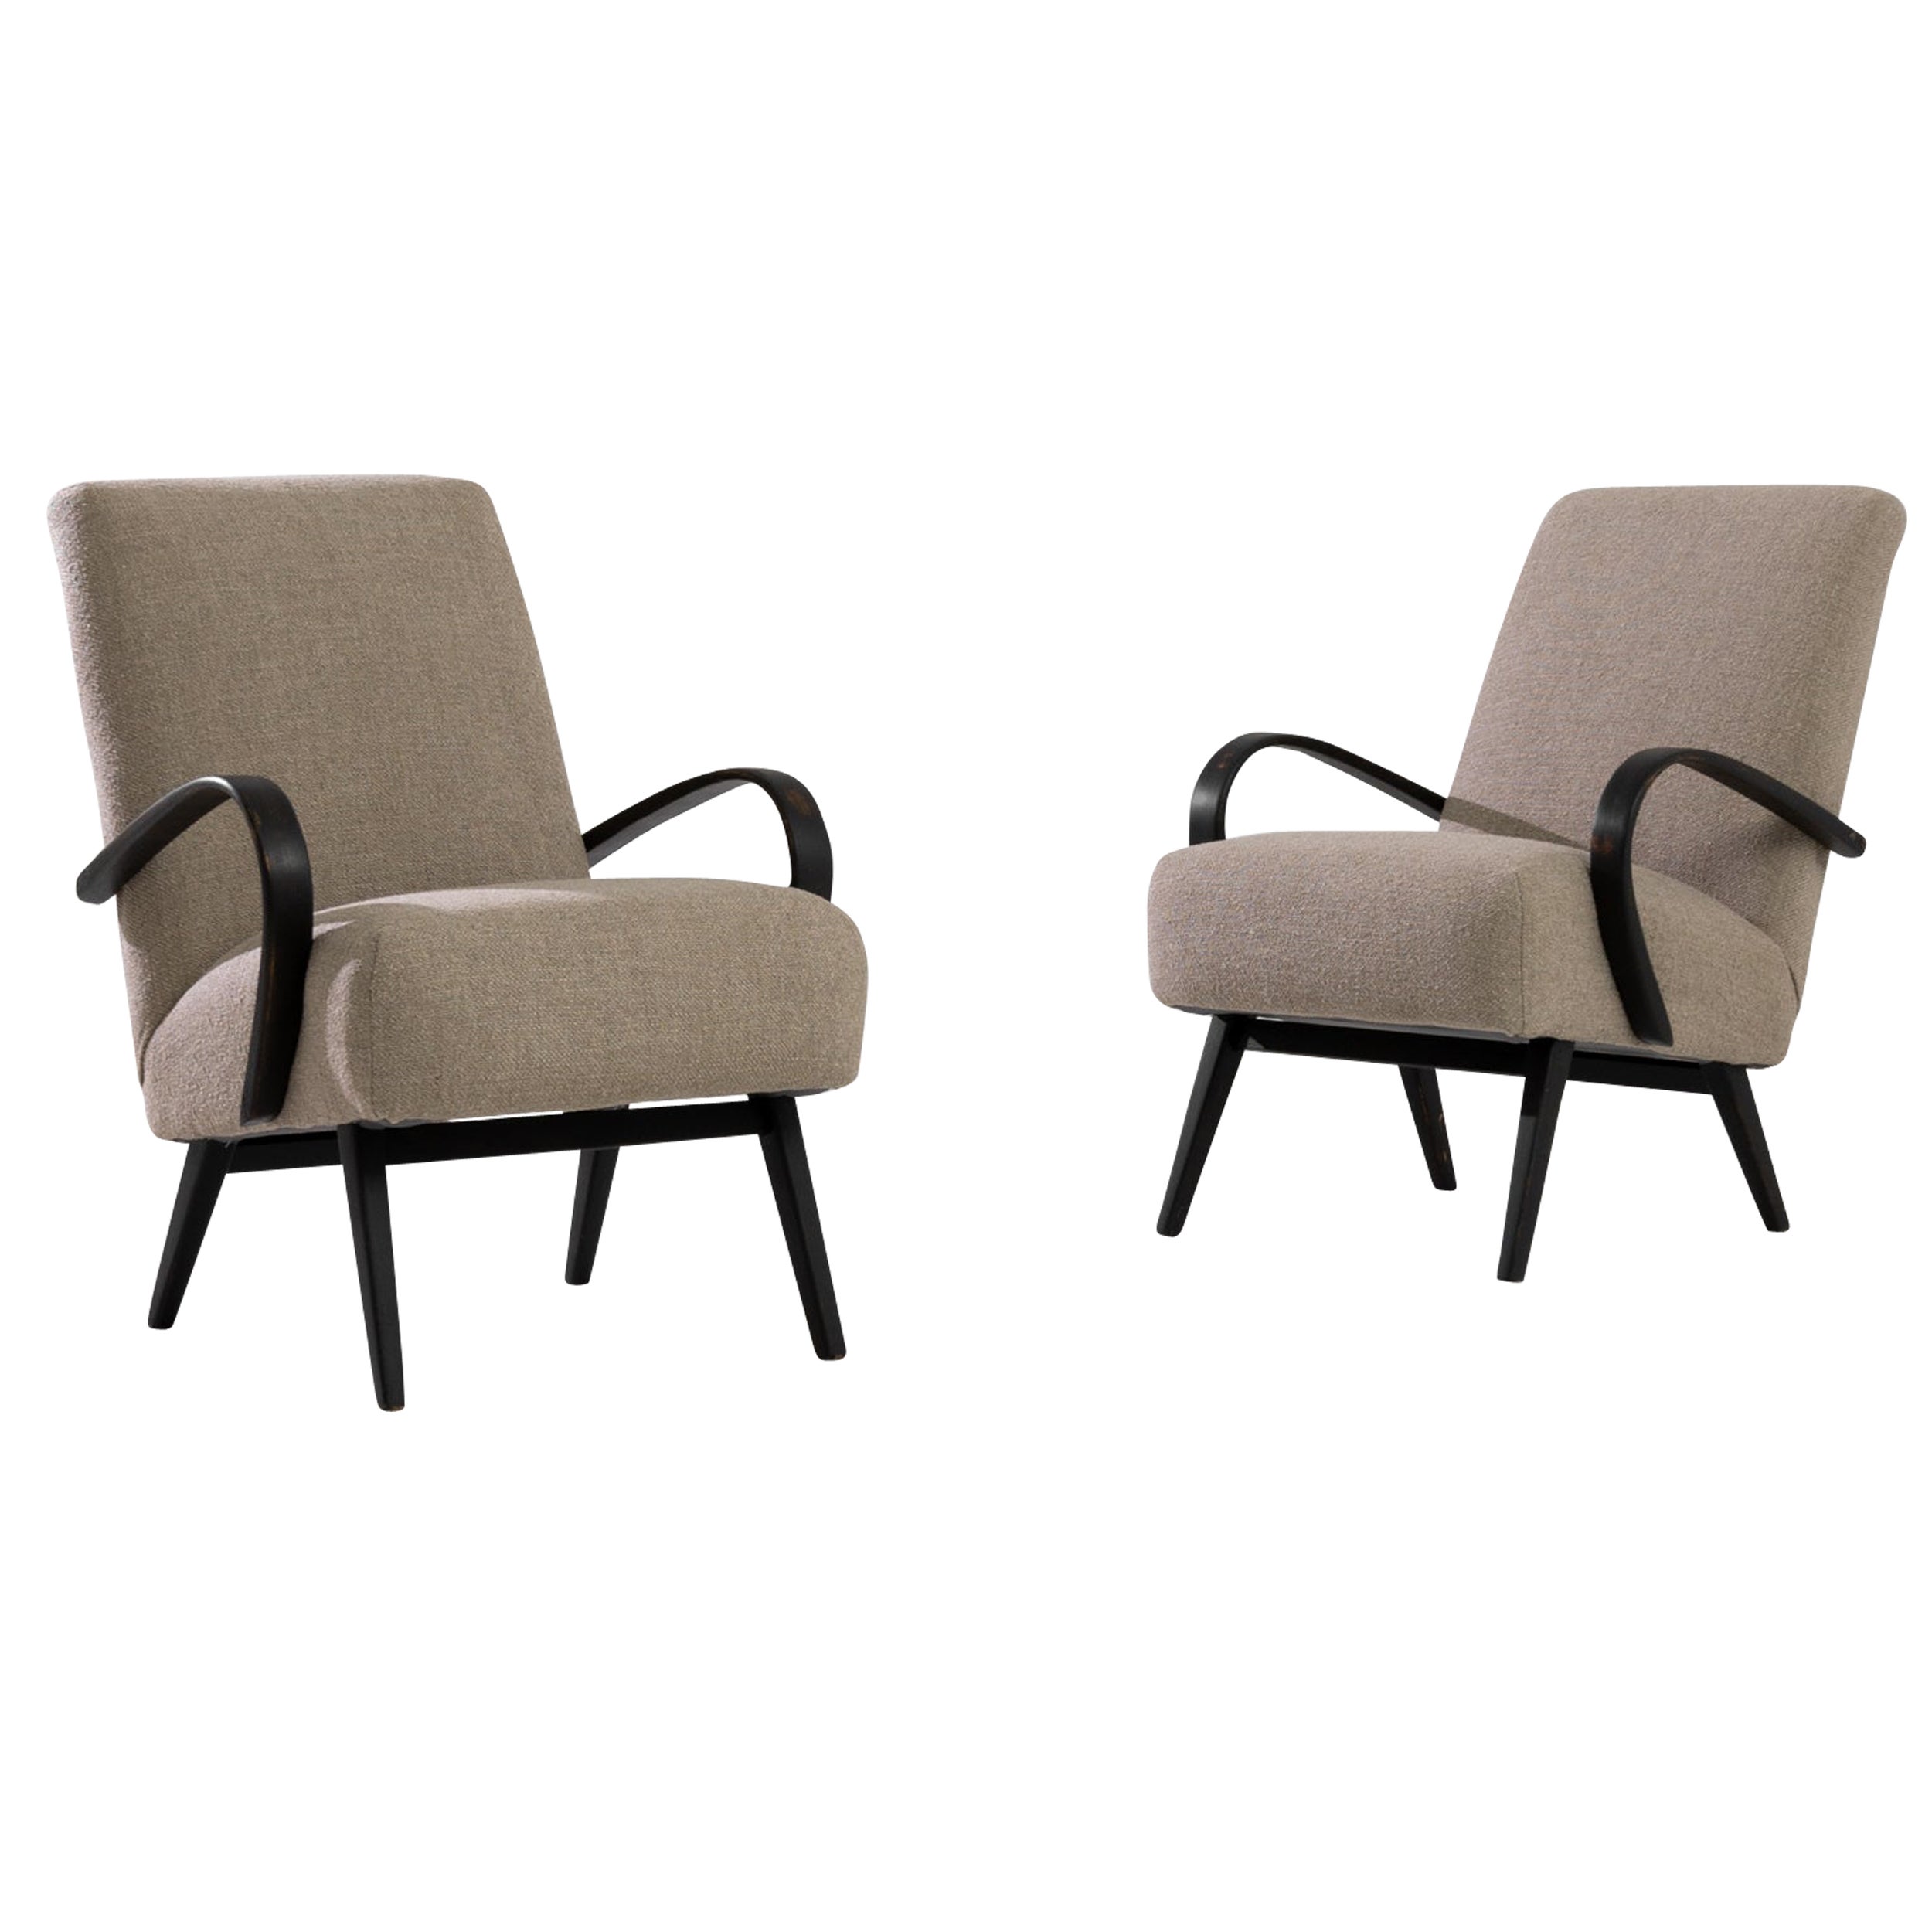 1950s Armchairs by J. Halabala, Pair For Sale